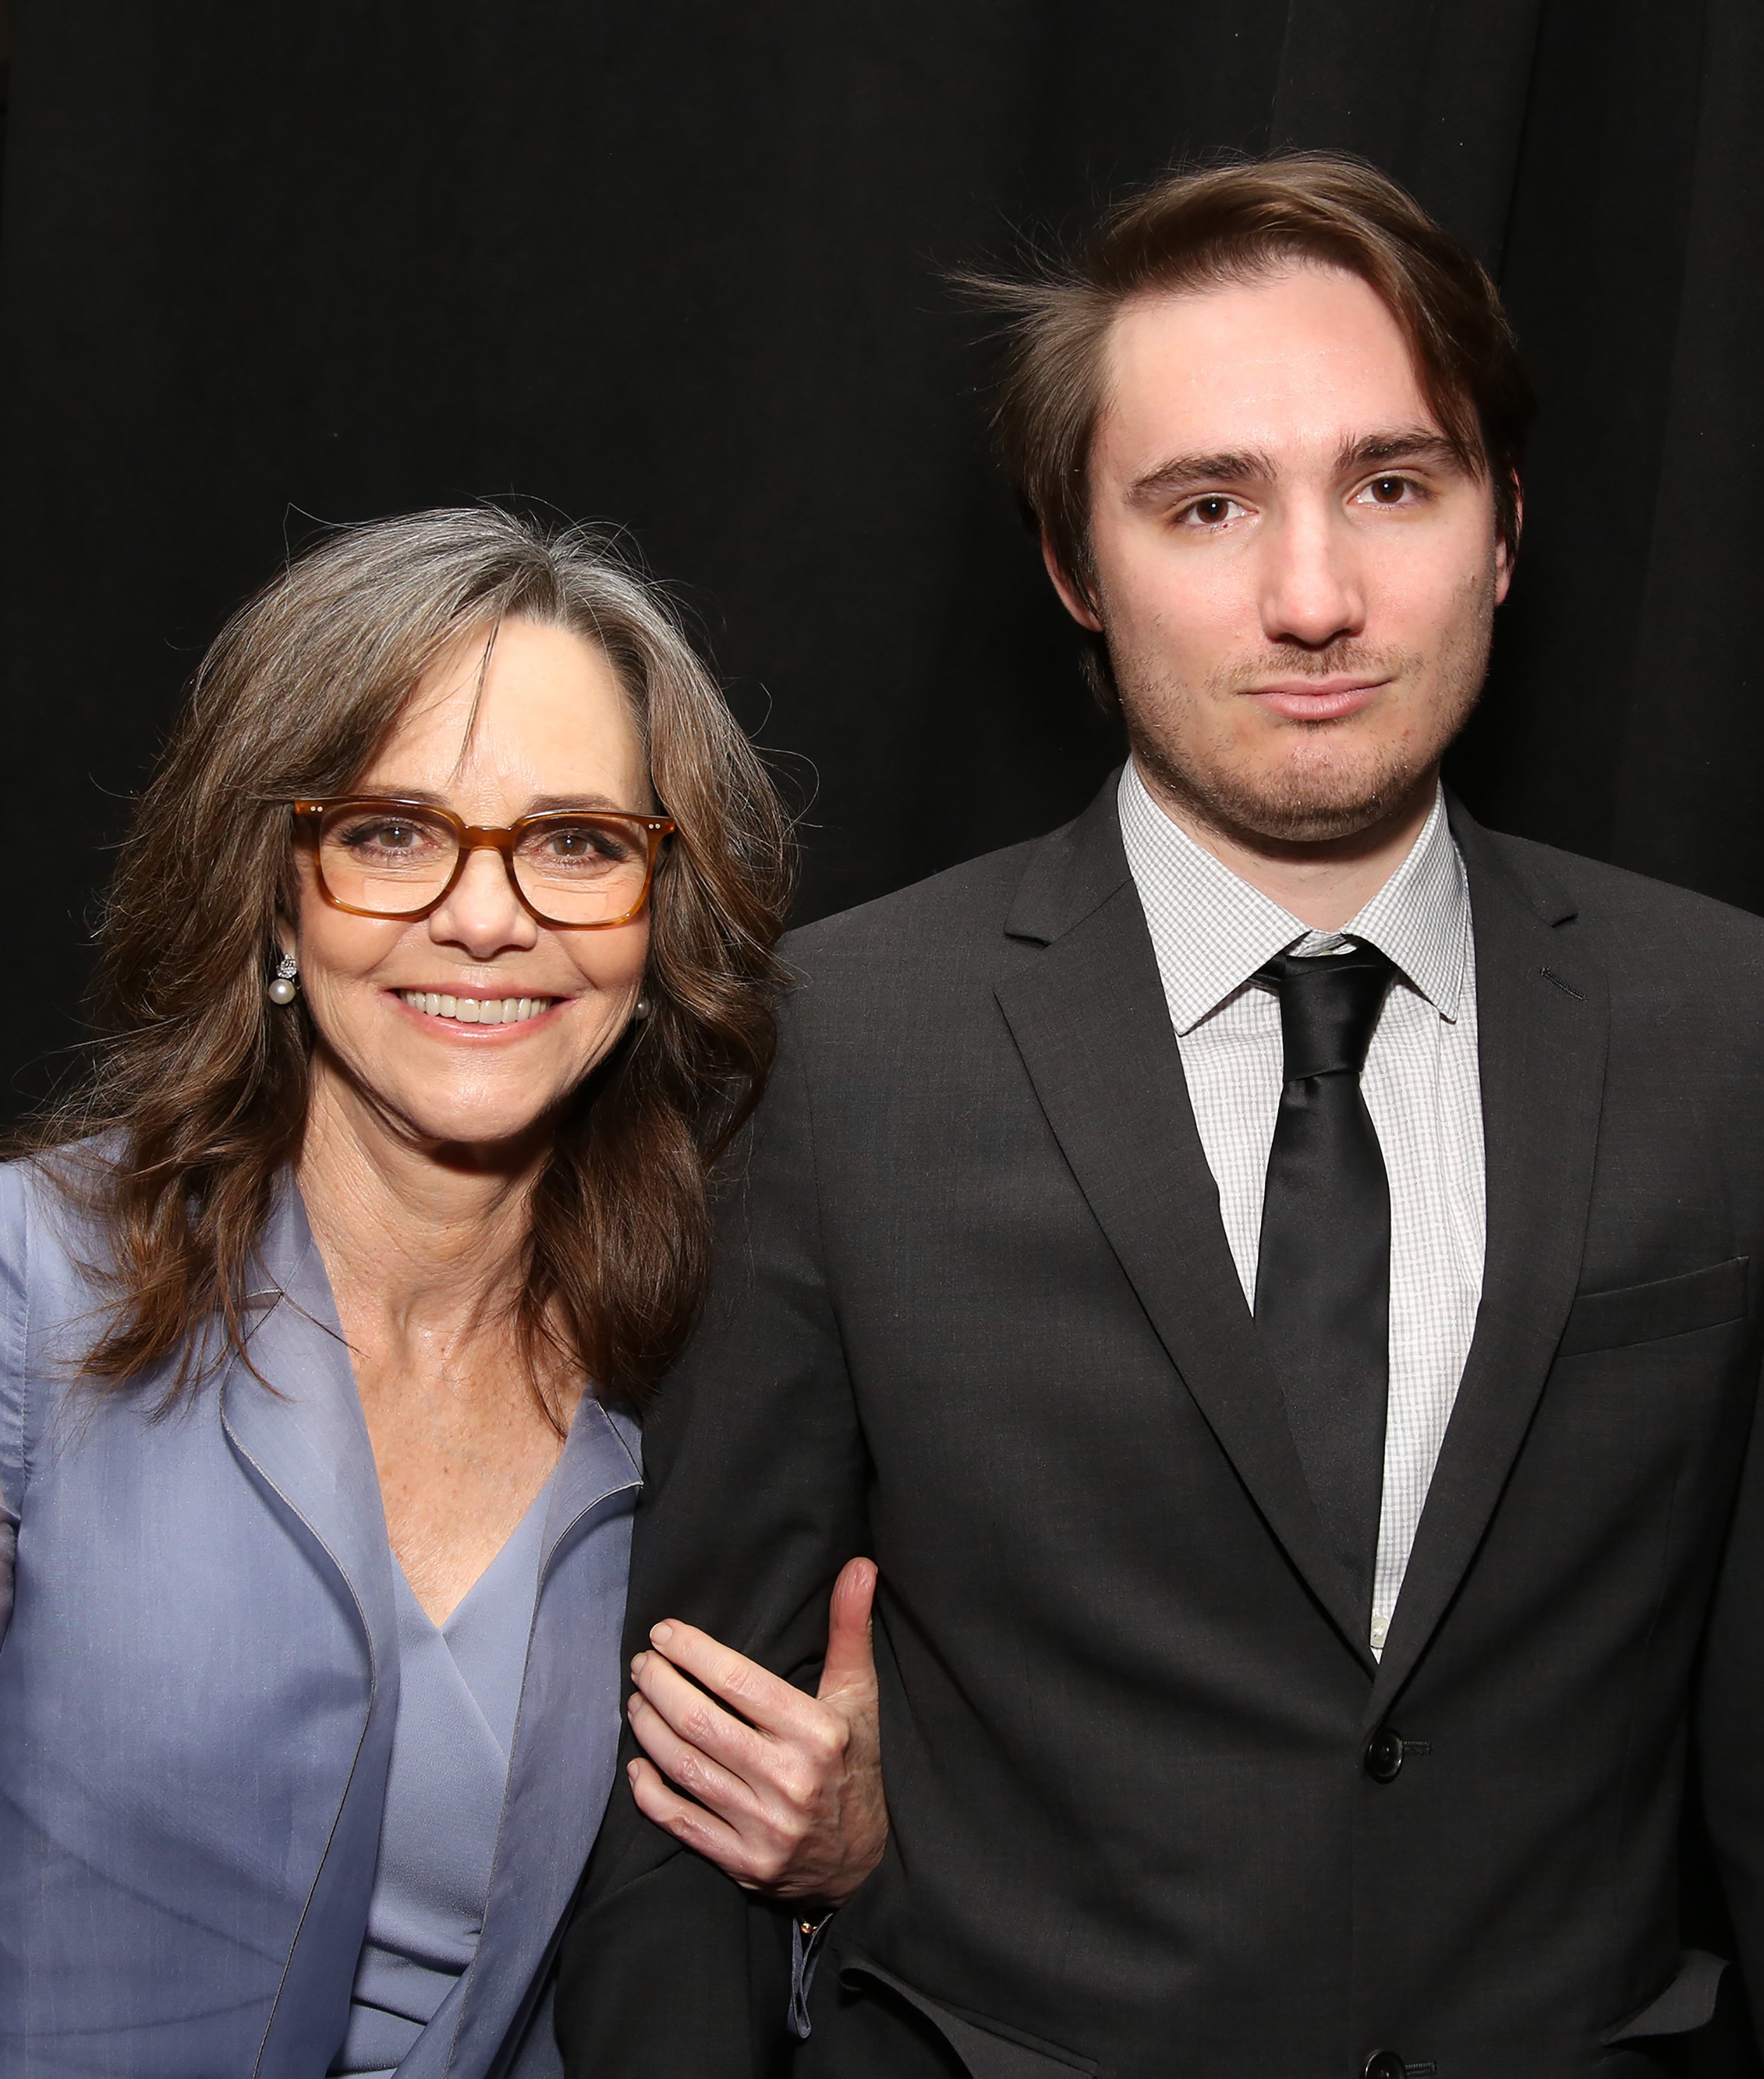  Sally Field and son Samuel Greisman attend The Actors Fund Annual Gala at the Marriott Marquis on 5/8//2017 in New York City. | Source: Getty Images